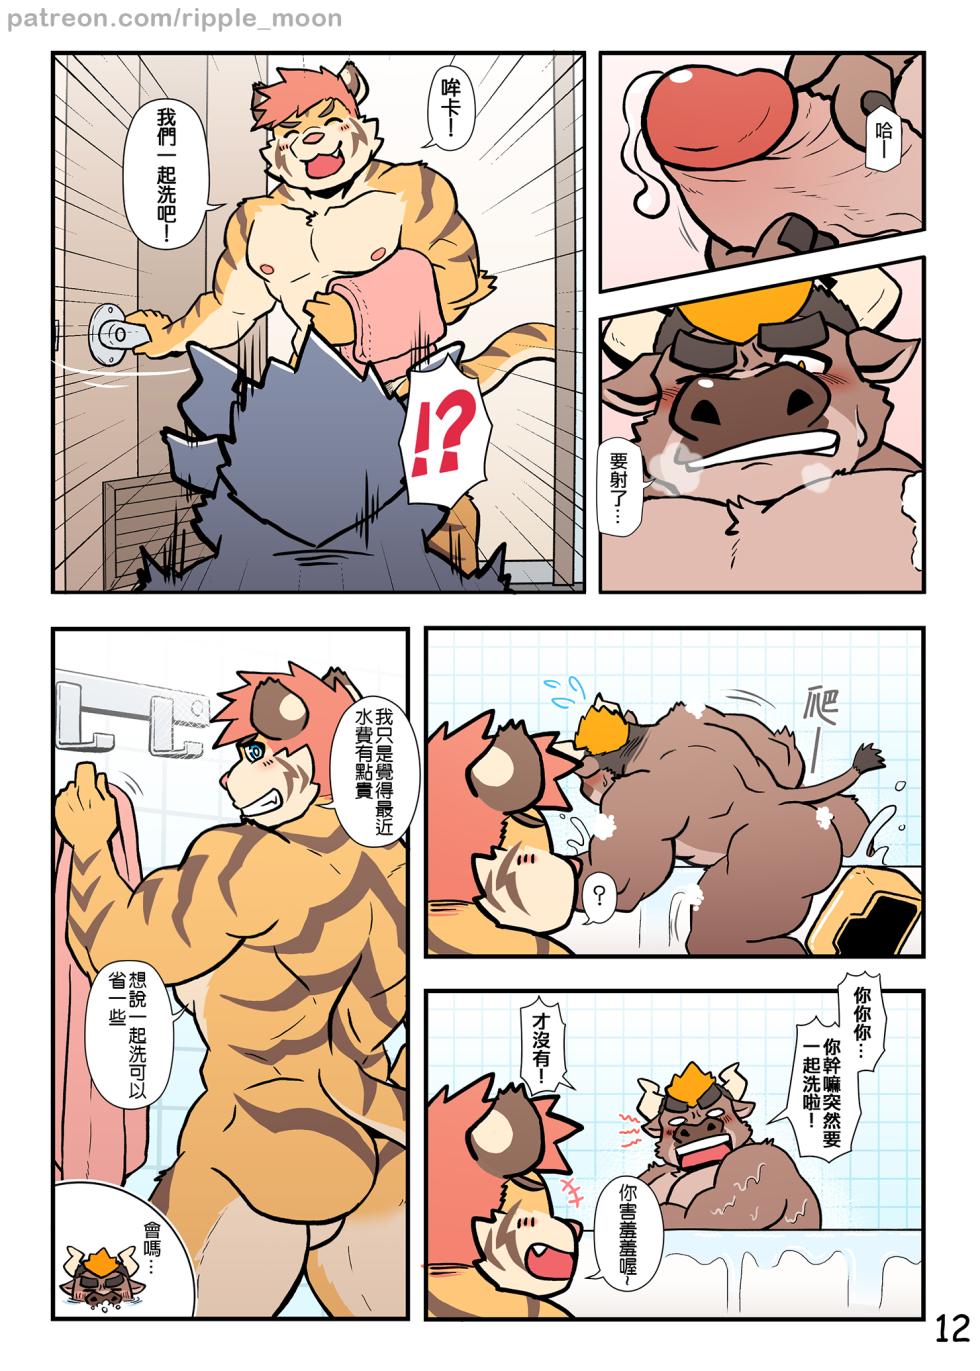 [Ripple Moon] My Milky Roomie 2: Milk Bath (Ongoing) [Chinese] (Flat Color) - Page 14